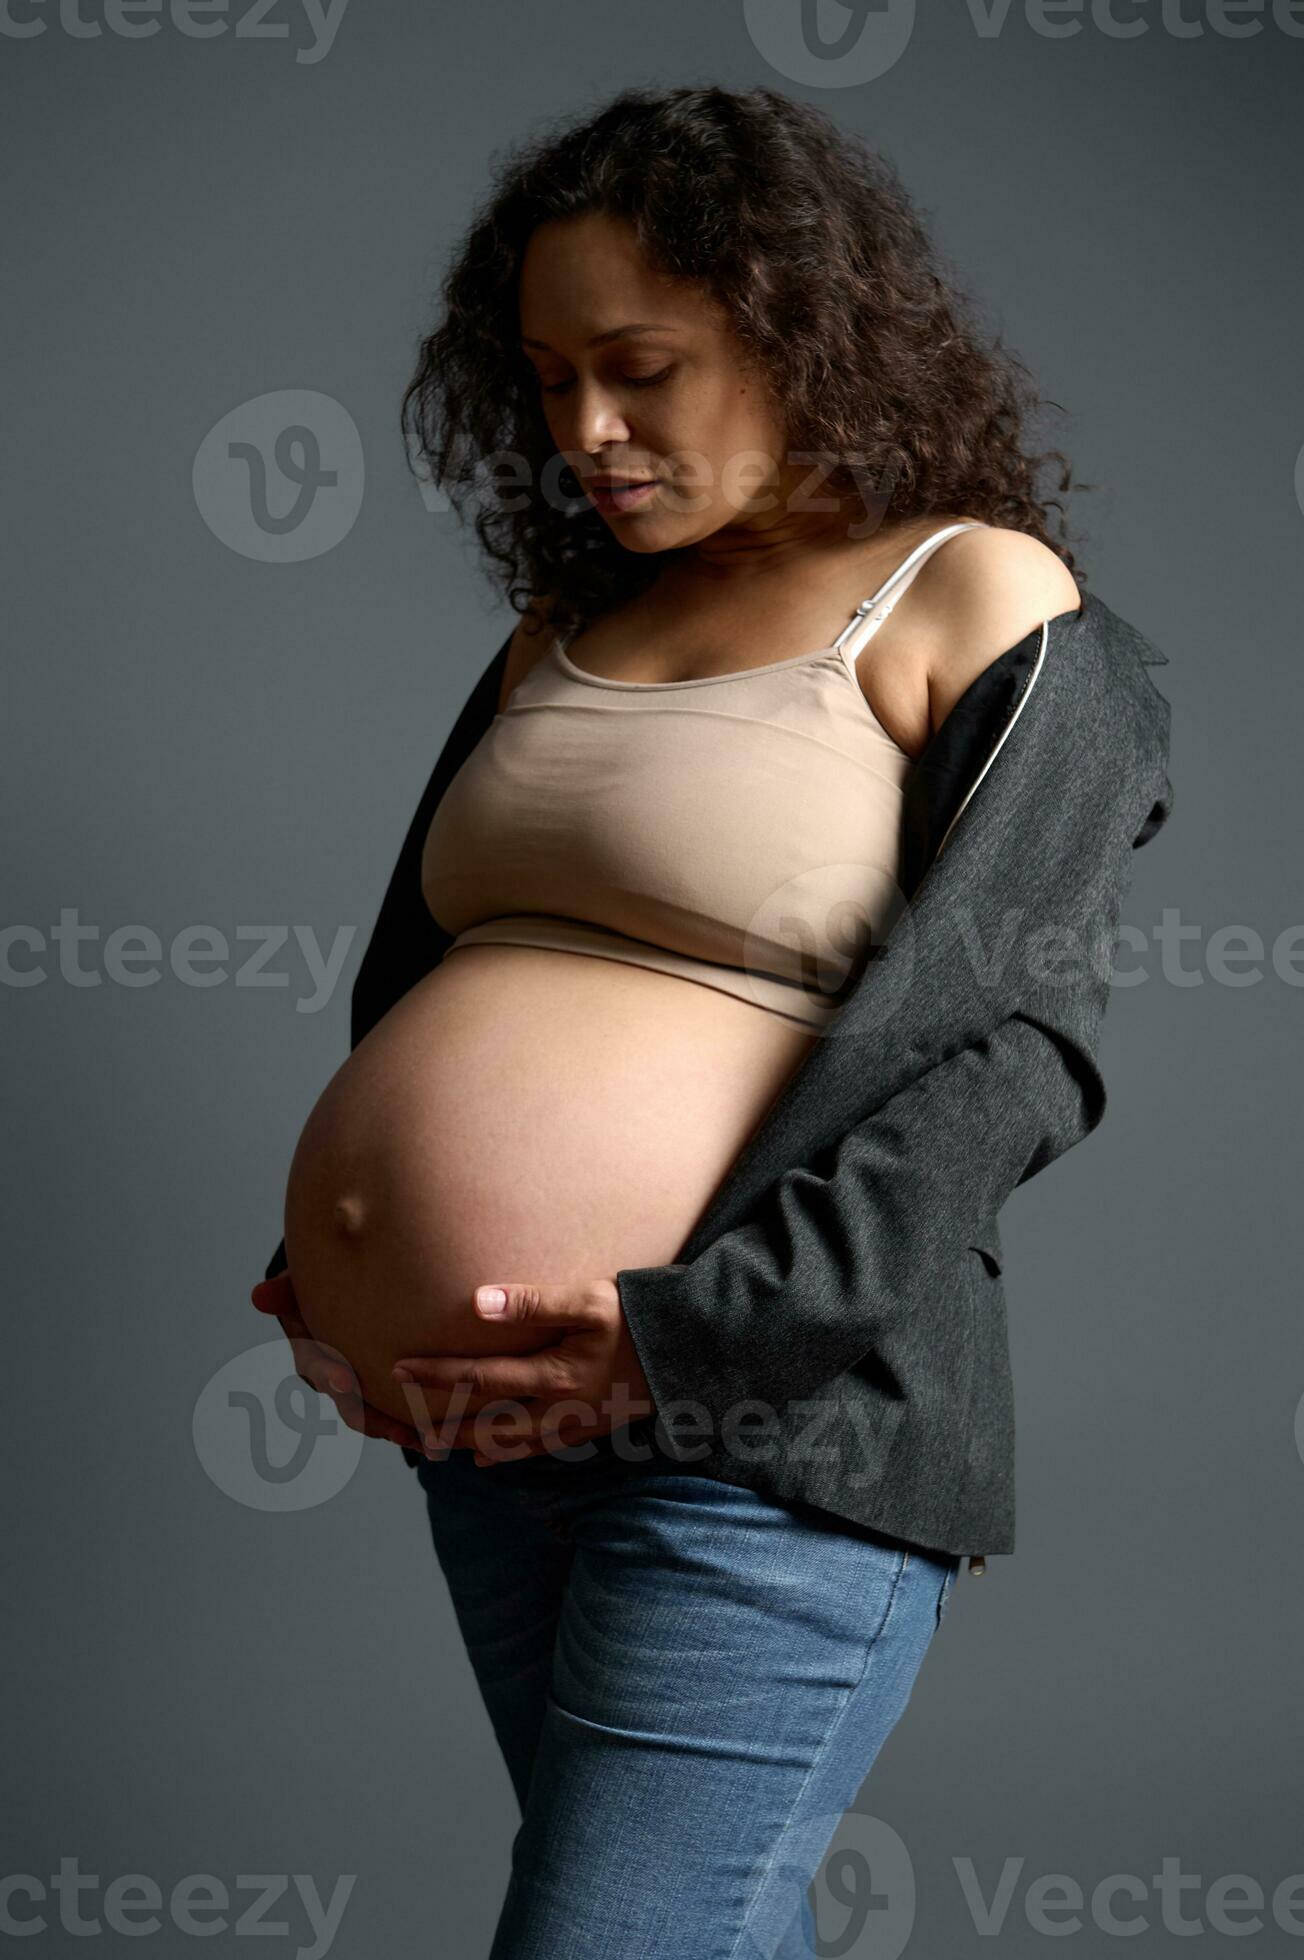 https://static.vecteezy.com/system/resources/previews/027/029/634/large_2x/attractive-pregnant-woman-gently-stroking-her-big-belly-experiencing-wonderful-emotions-feeling-baby-moves-pregnancy-photo.jpg